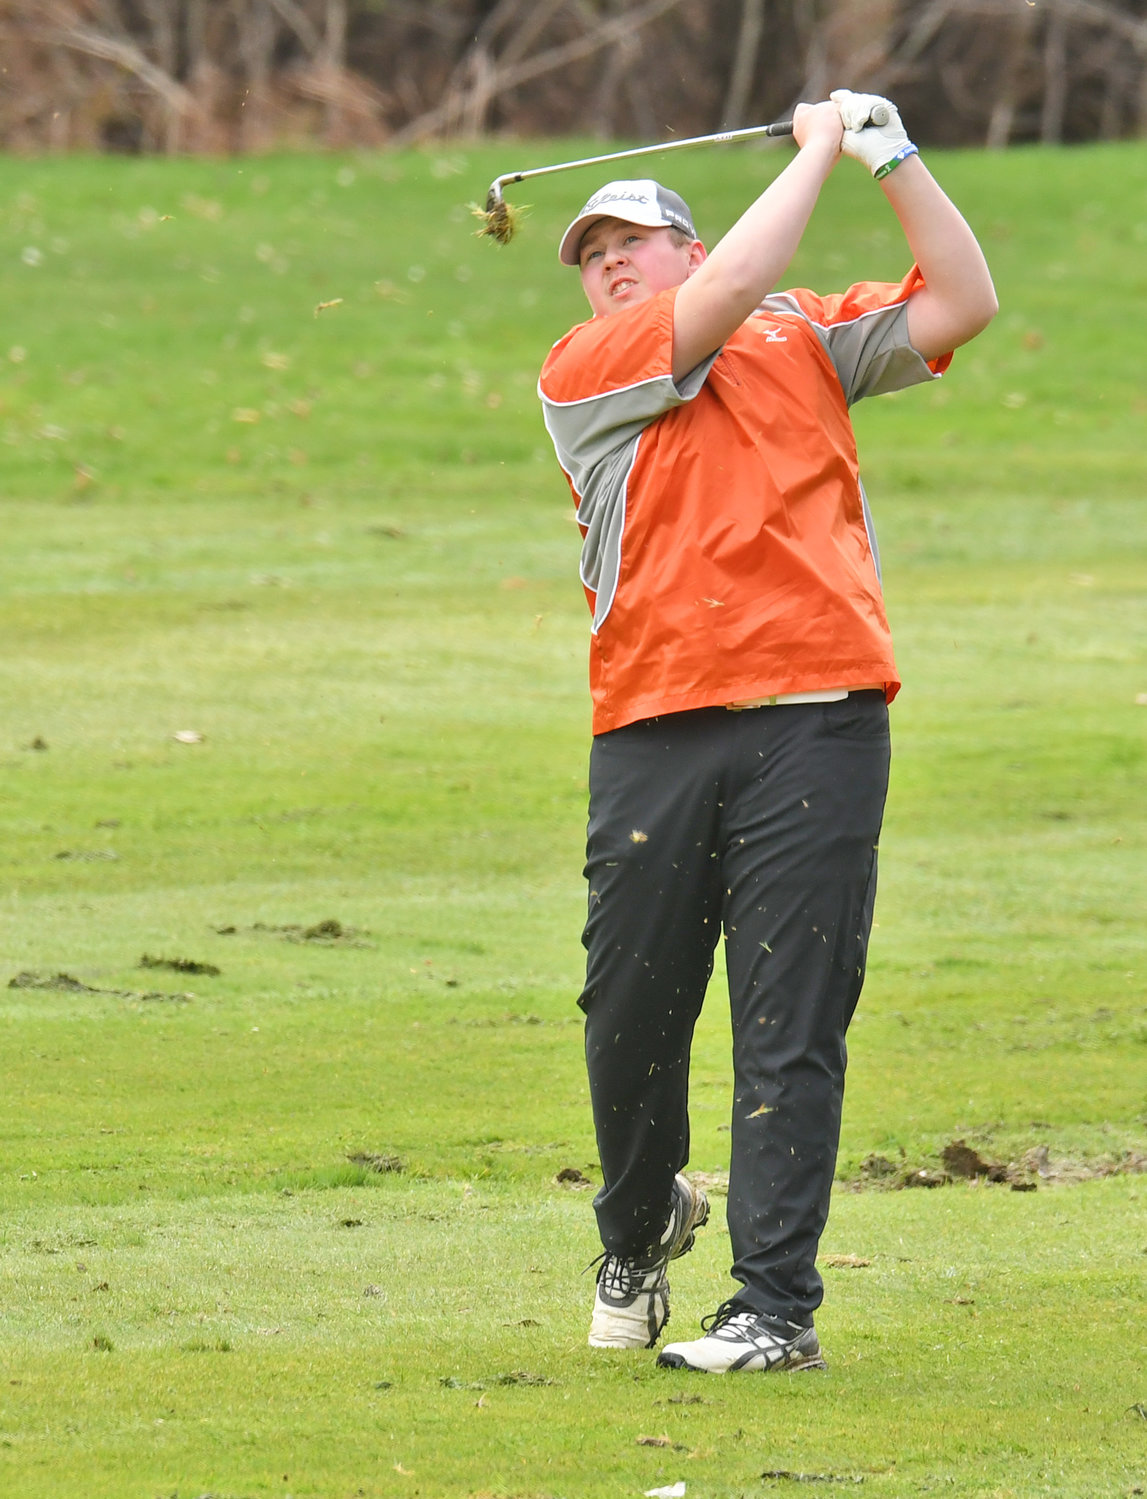 FIRE AWAY — Rome Free Academy golfer Michael Occhipinti hits an iron to the 11th green in the Black Knights' match against Whitesboro Wednesday afternoon at Rome Country Club. Occhipinti shot a team-best 48 but the Knights lost 229-280.